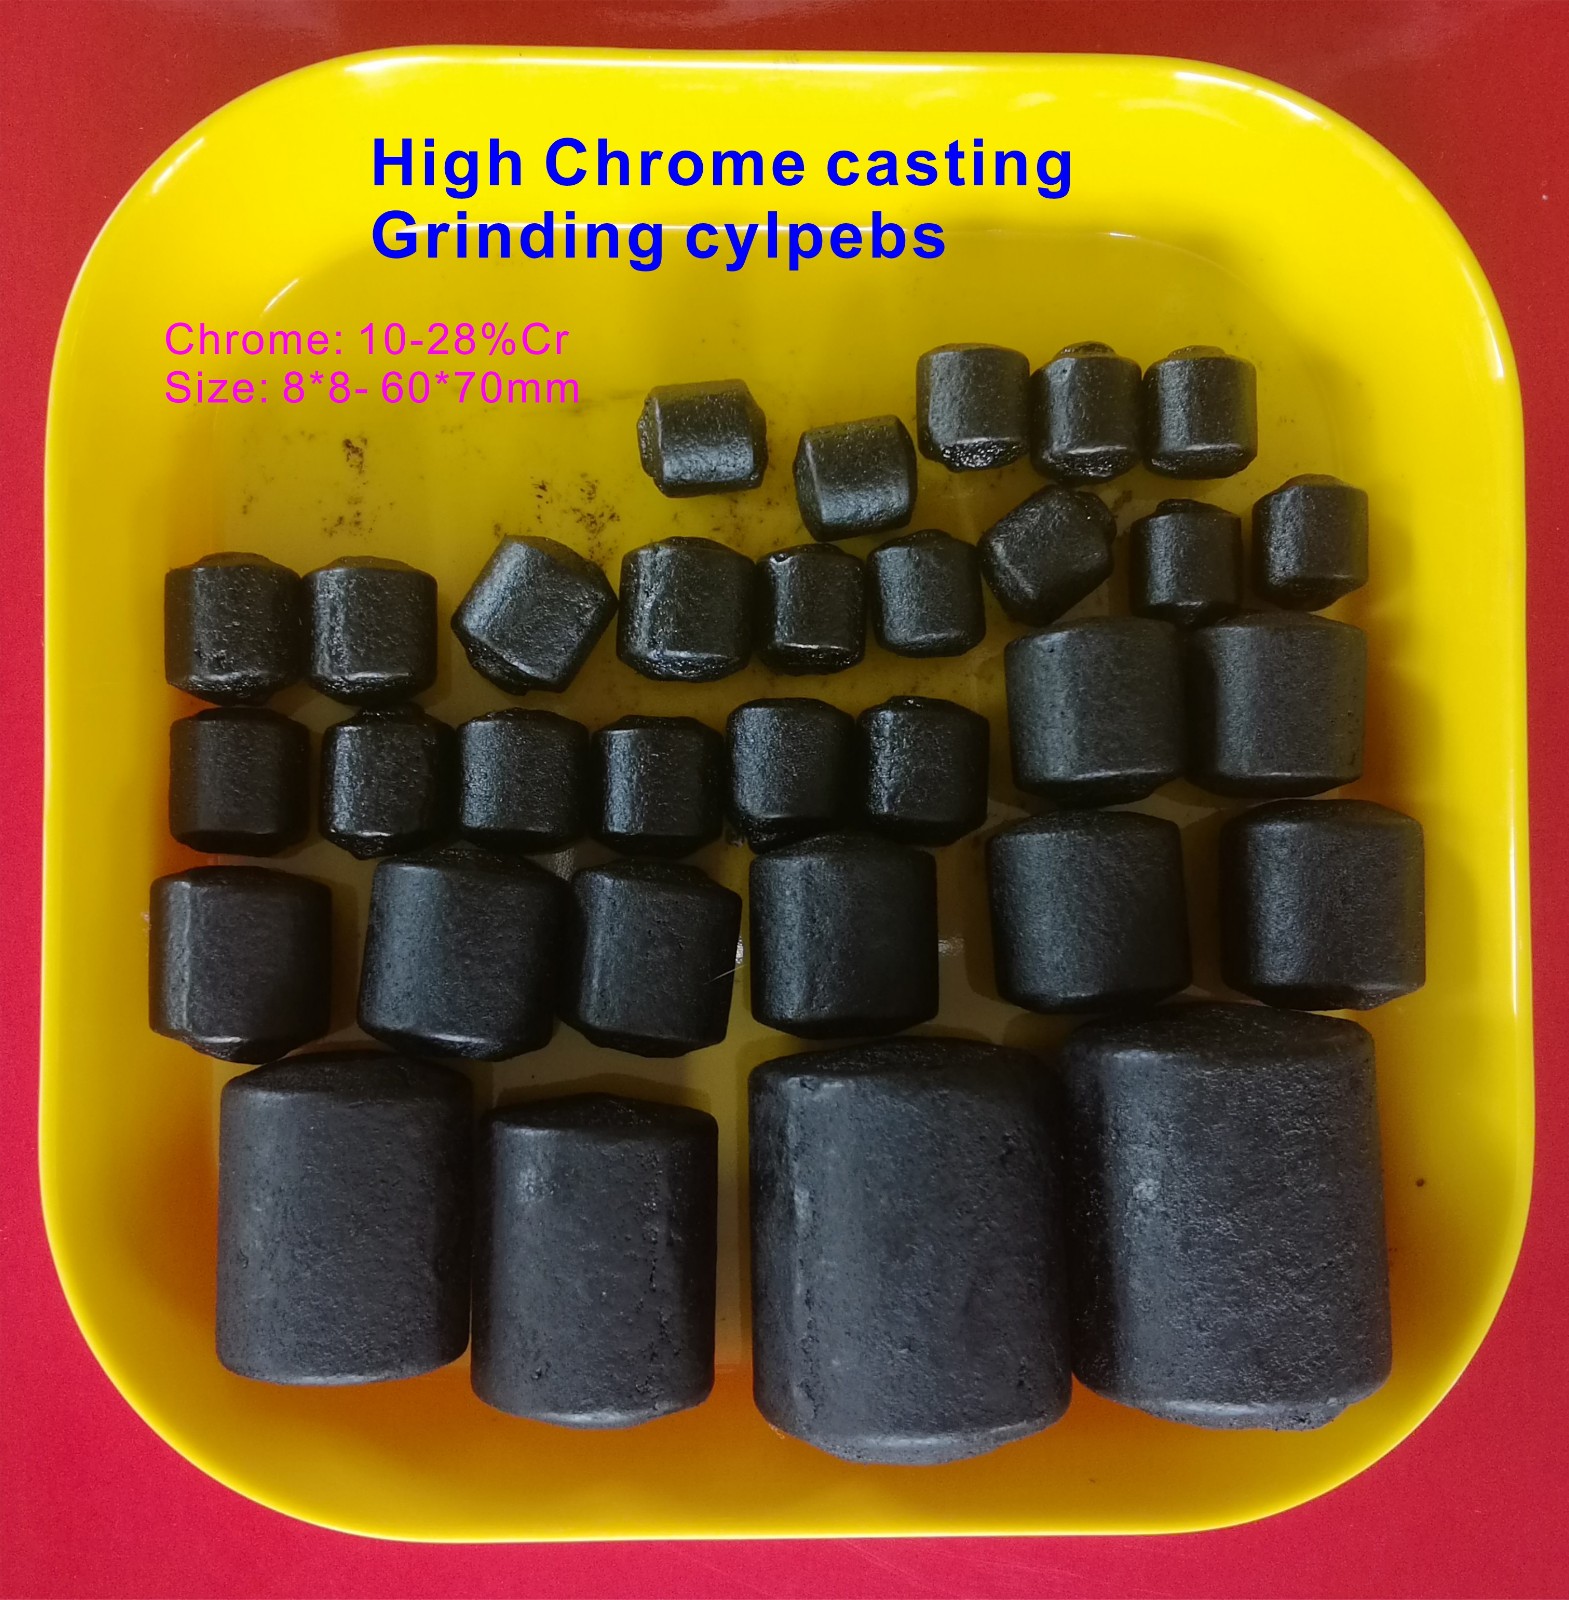 10-28%Cr high chrome casting grinding cylpebs